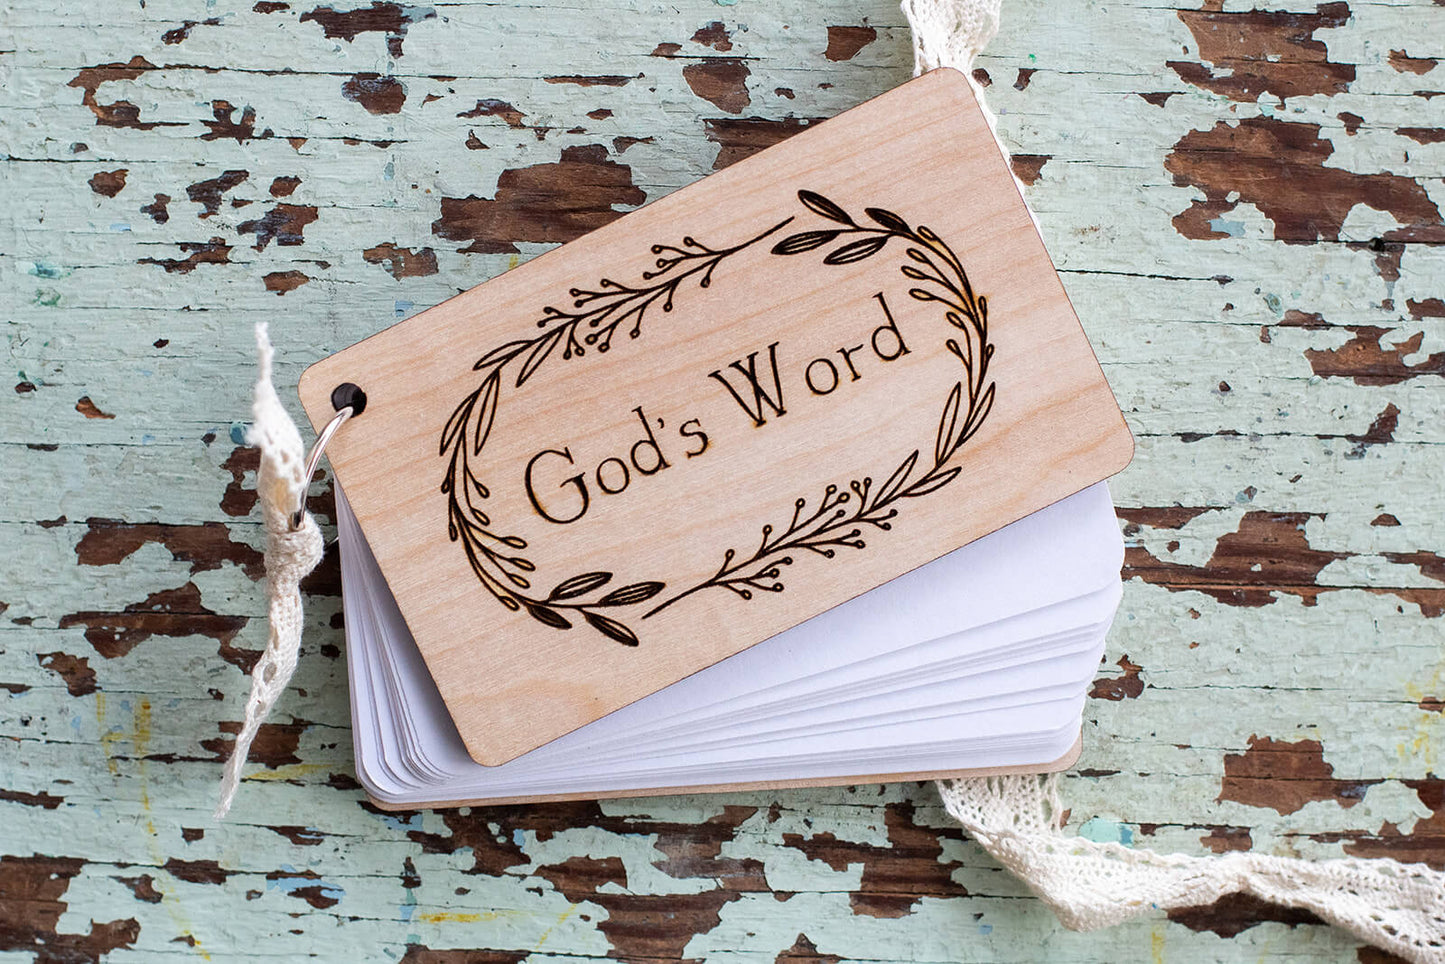 Get In the Word Discipleship Encouragement Box